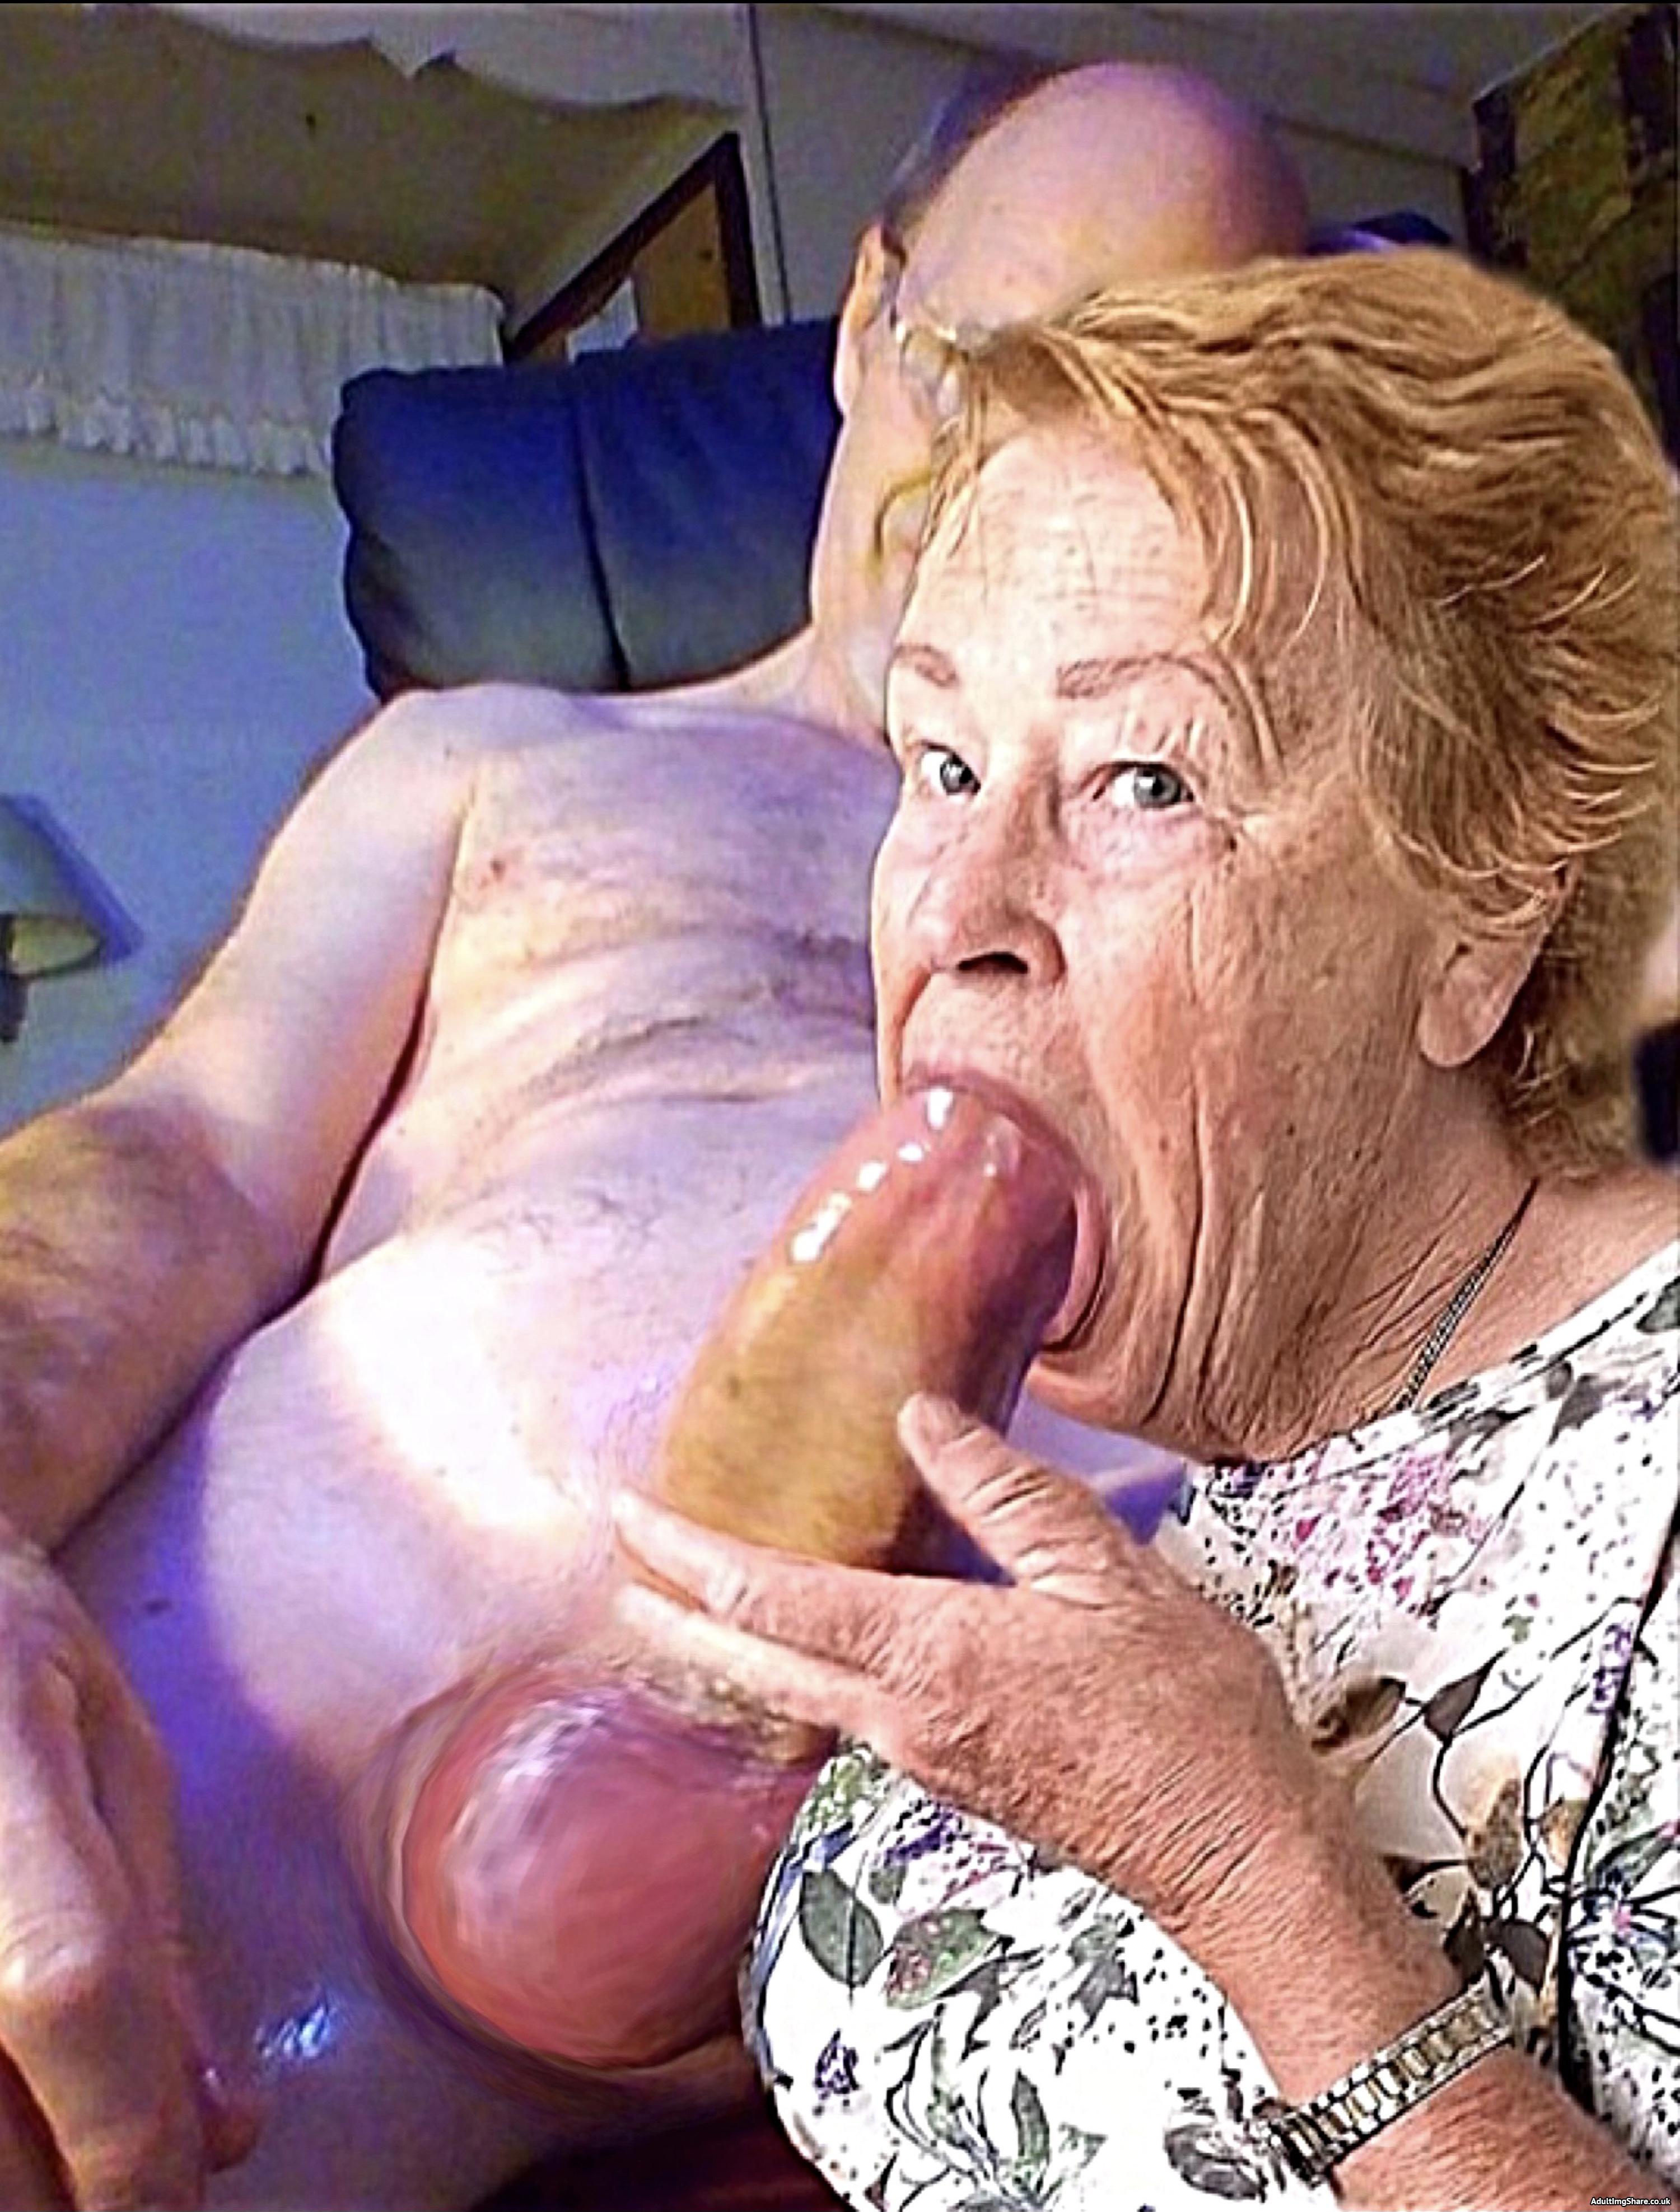 Cathy Cock Sucking Blowjob Granny having affair with Neighbour Sucking off Johns Big Cock